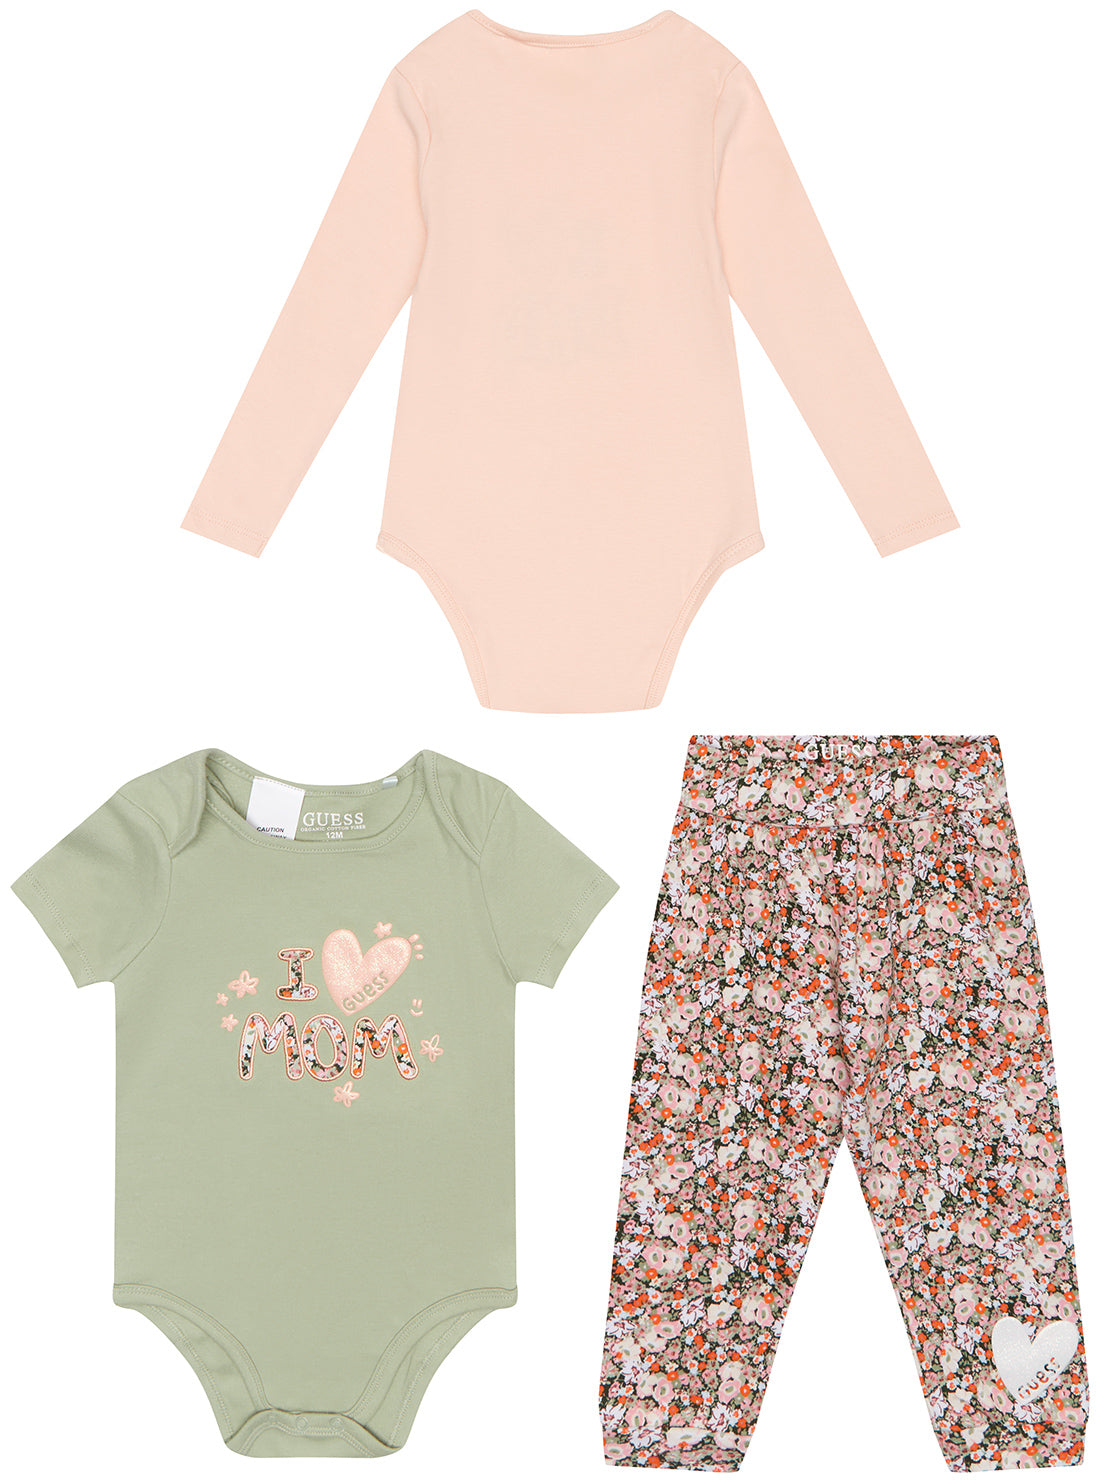 Pink and Green "I Love" Onesie and Print Pant Set (0-9M) | GUESS Kids | back view